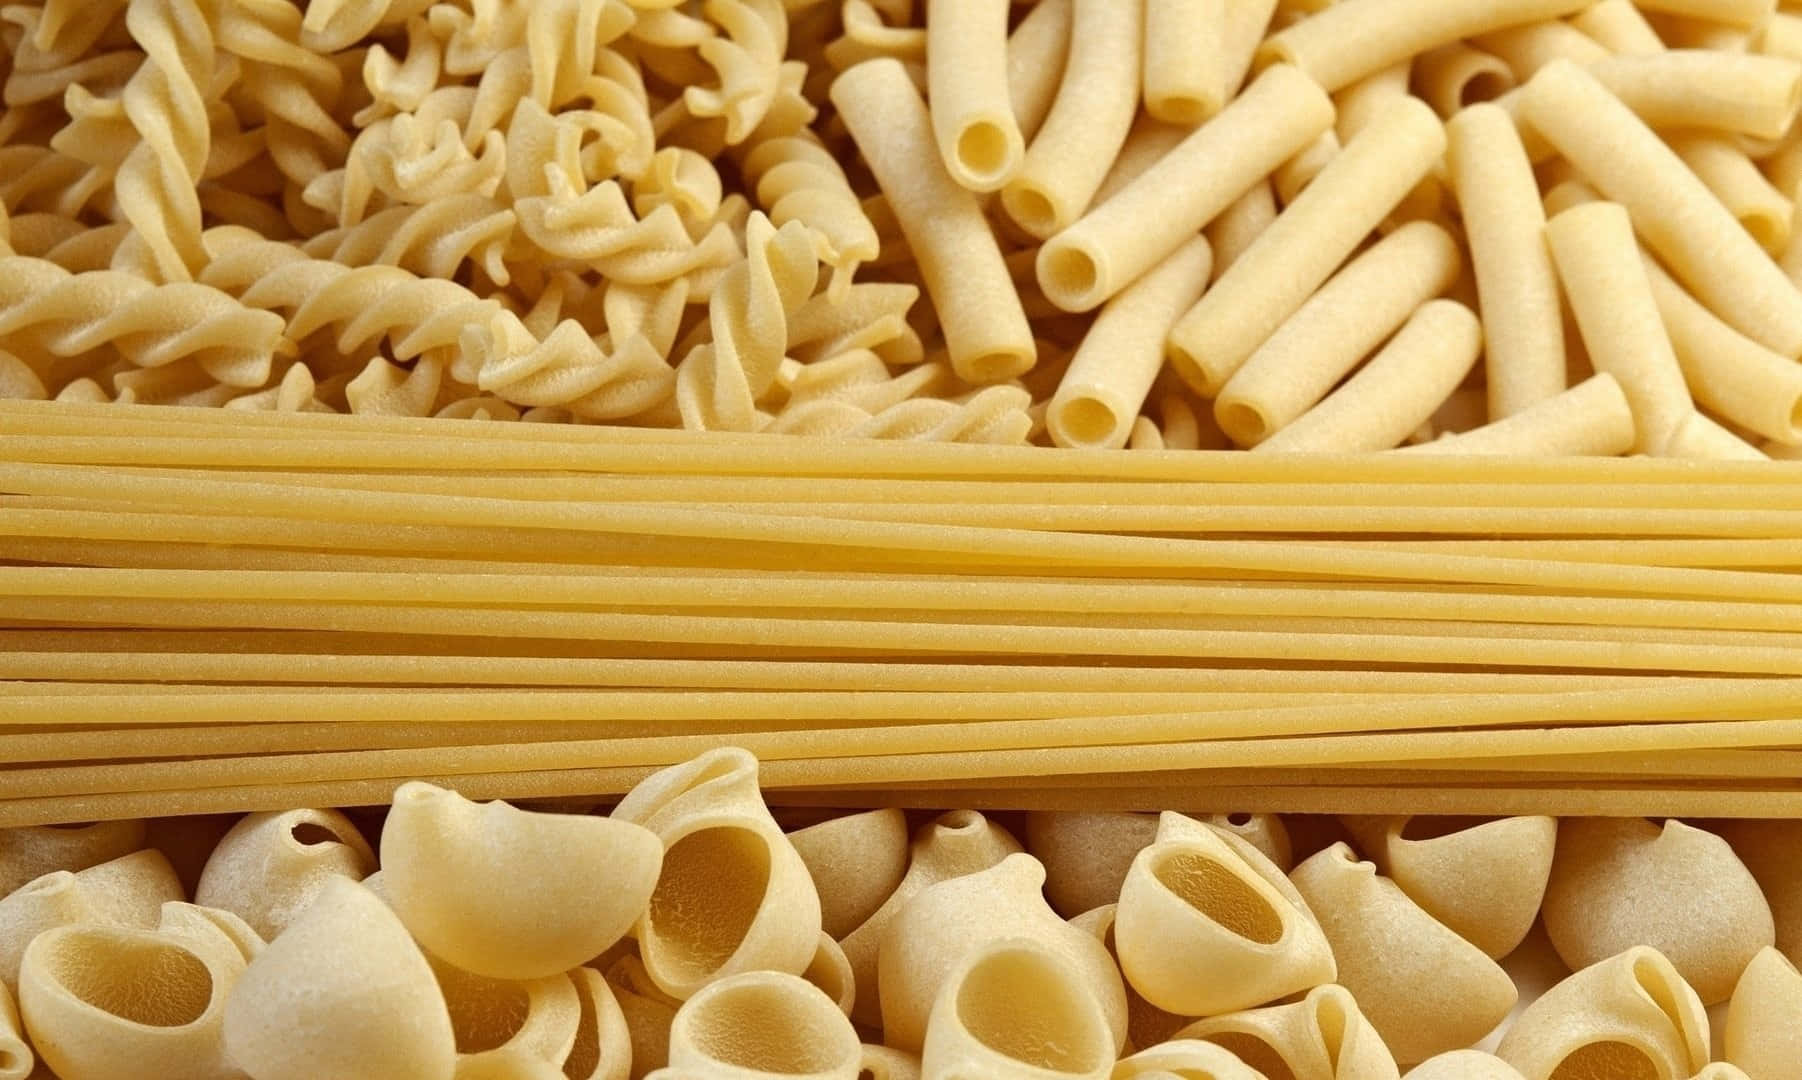 A Close Up Of Various Pastas And Noodles